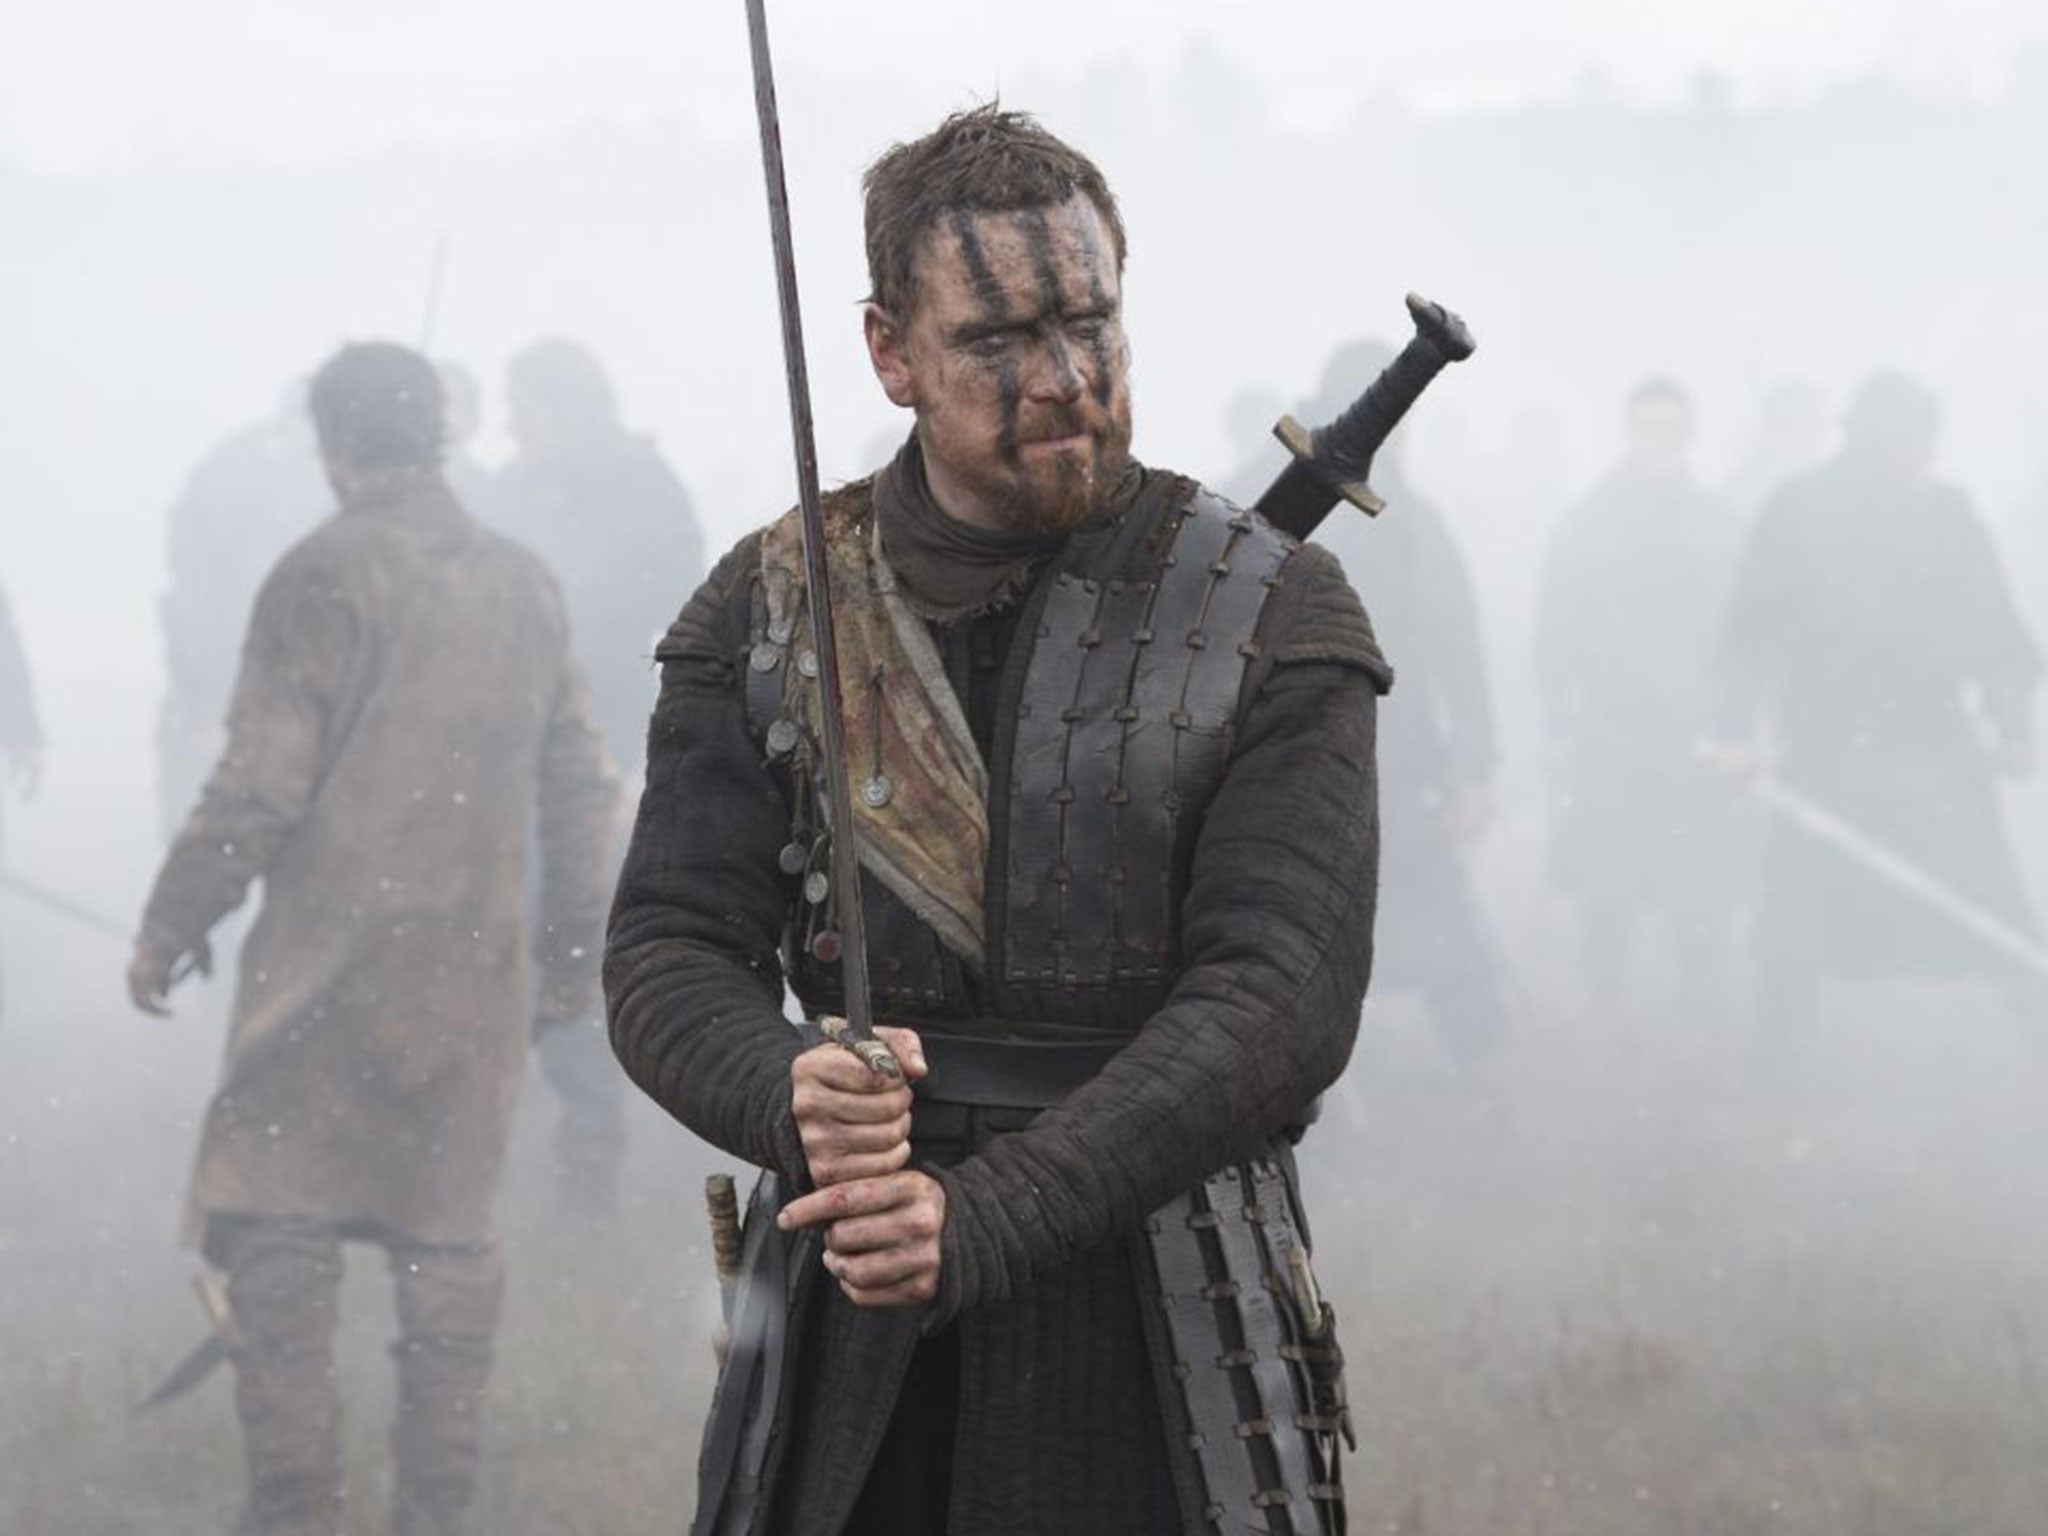 Michael Fassbender stars in the vaguely medieval new Macbeth